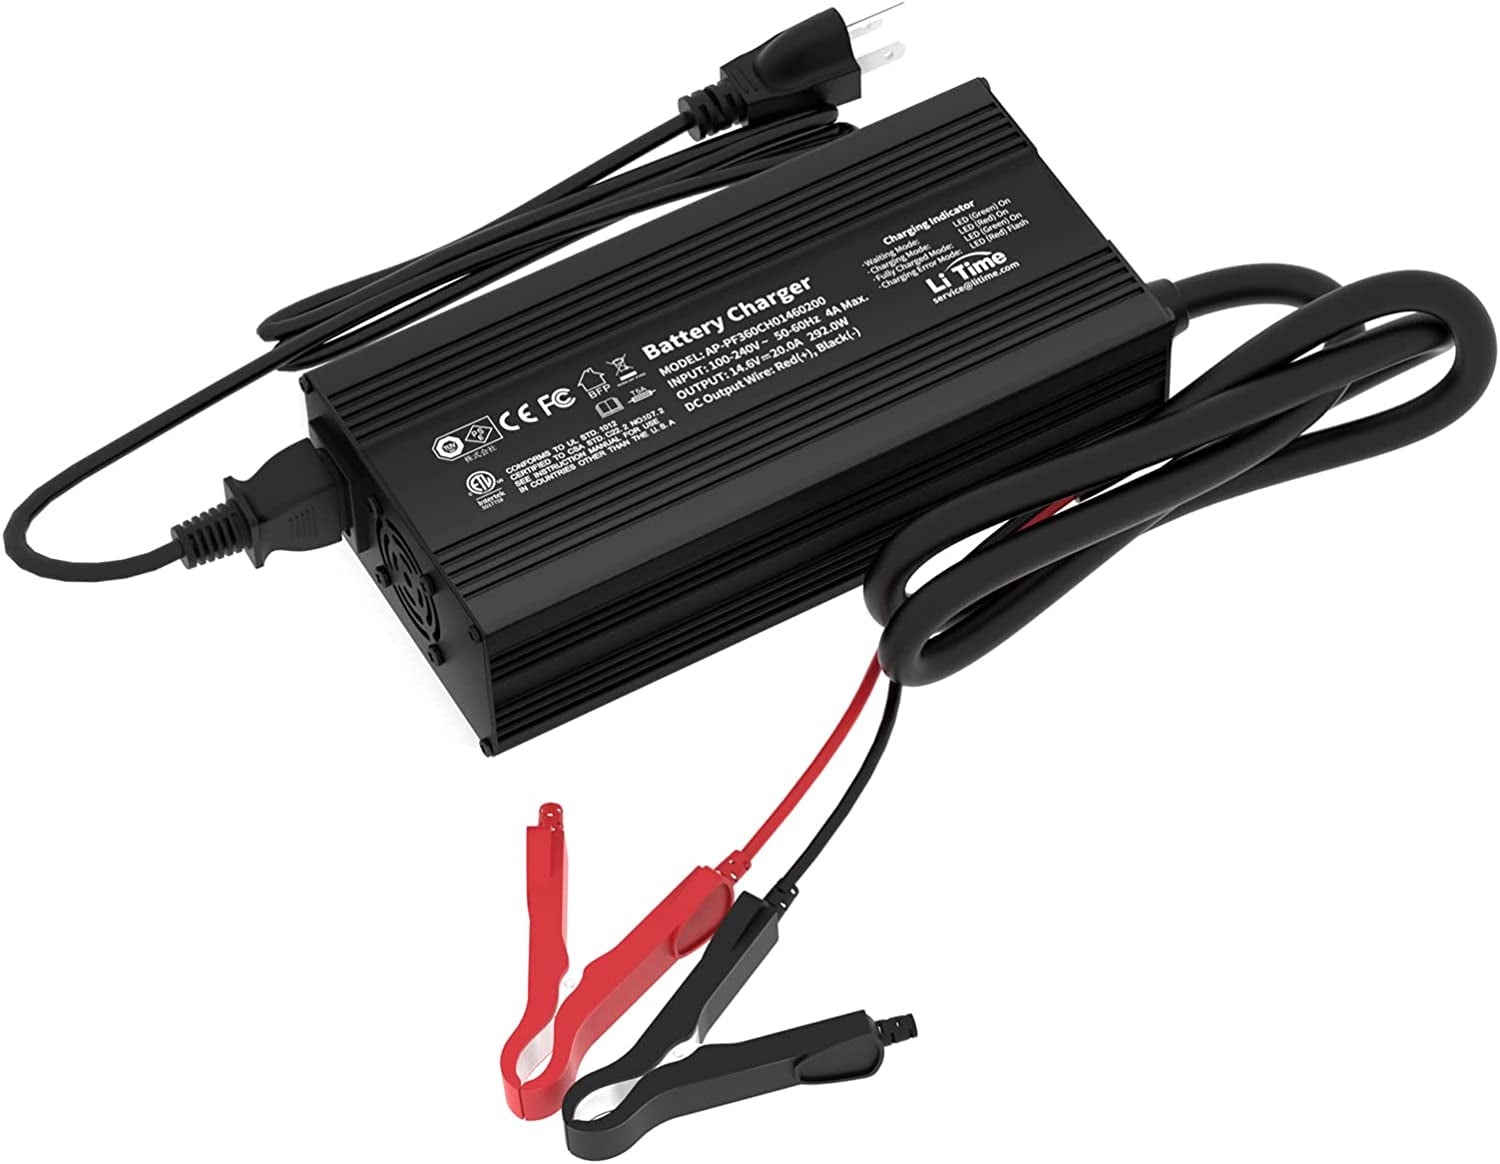 Adcbatt 12V 50Ah Lithium LiFePO4 Battery with Low Temp Cut-off for  RV,Trolling Motor, Backup 